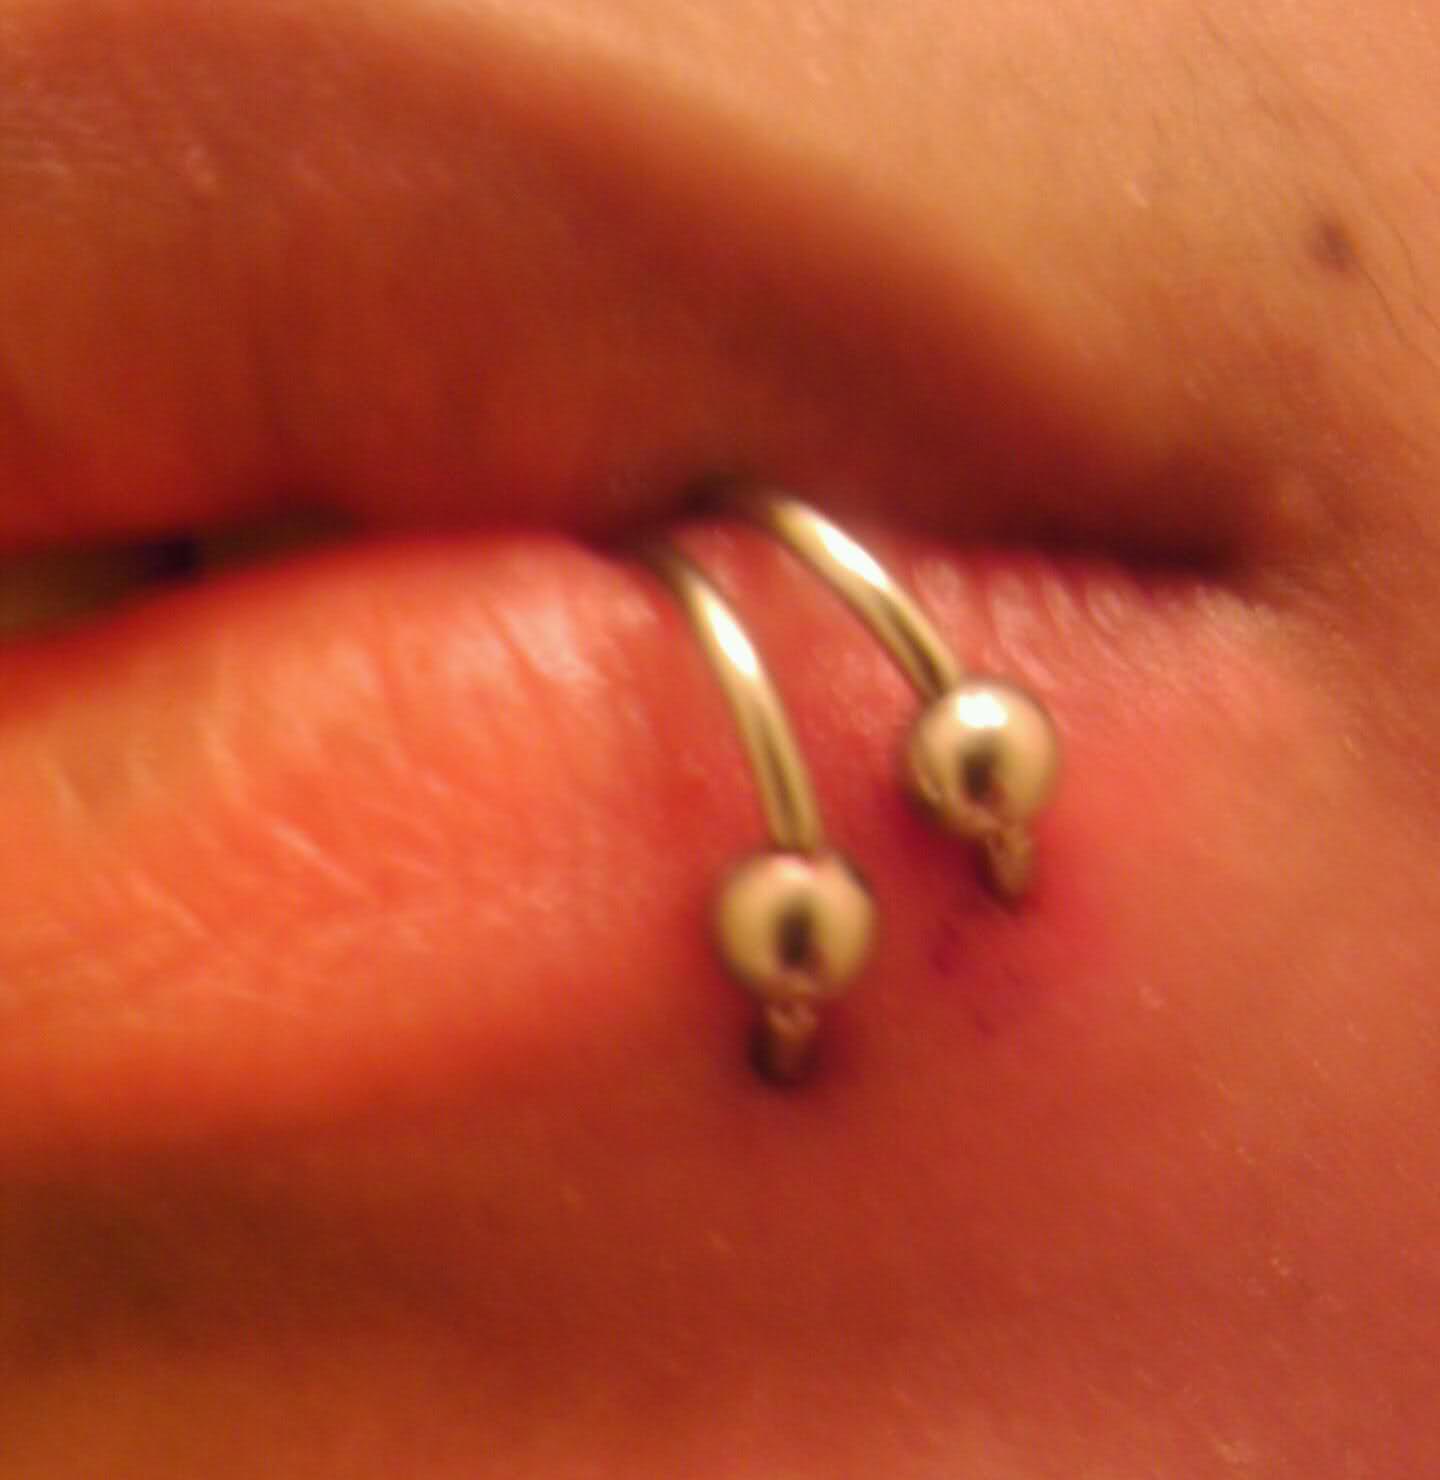 Dual Lip Piercing With Bead Ring